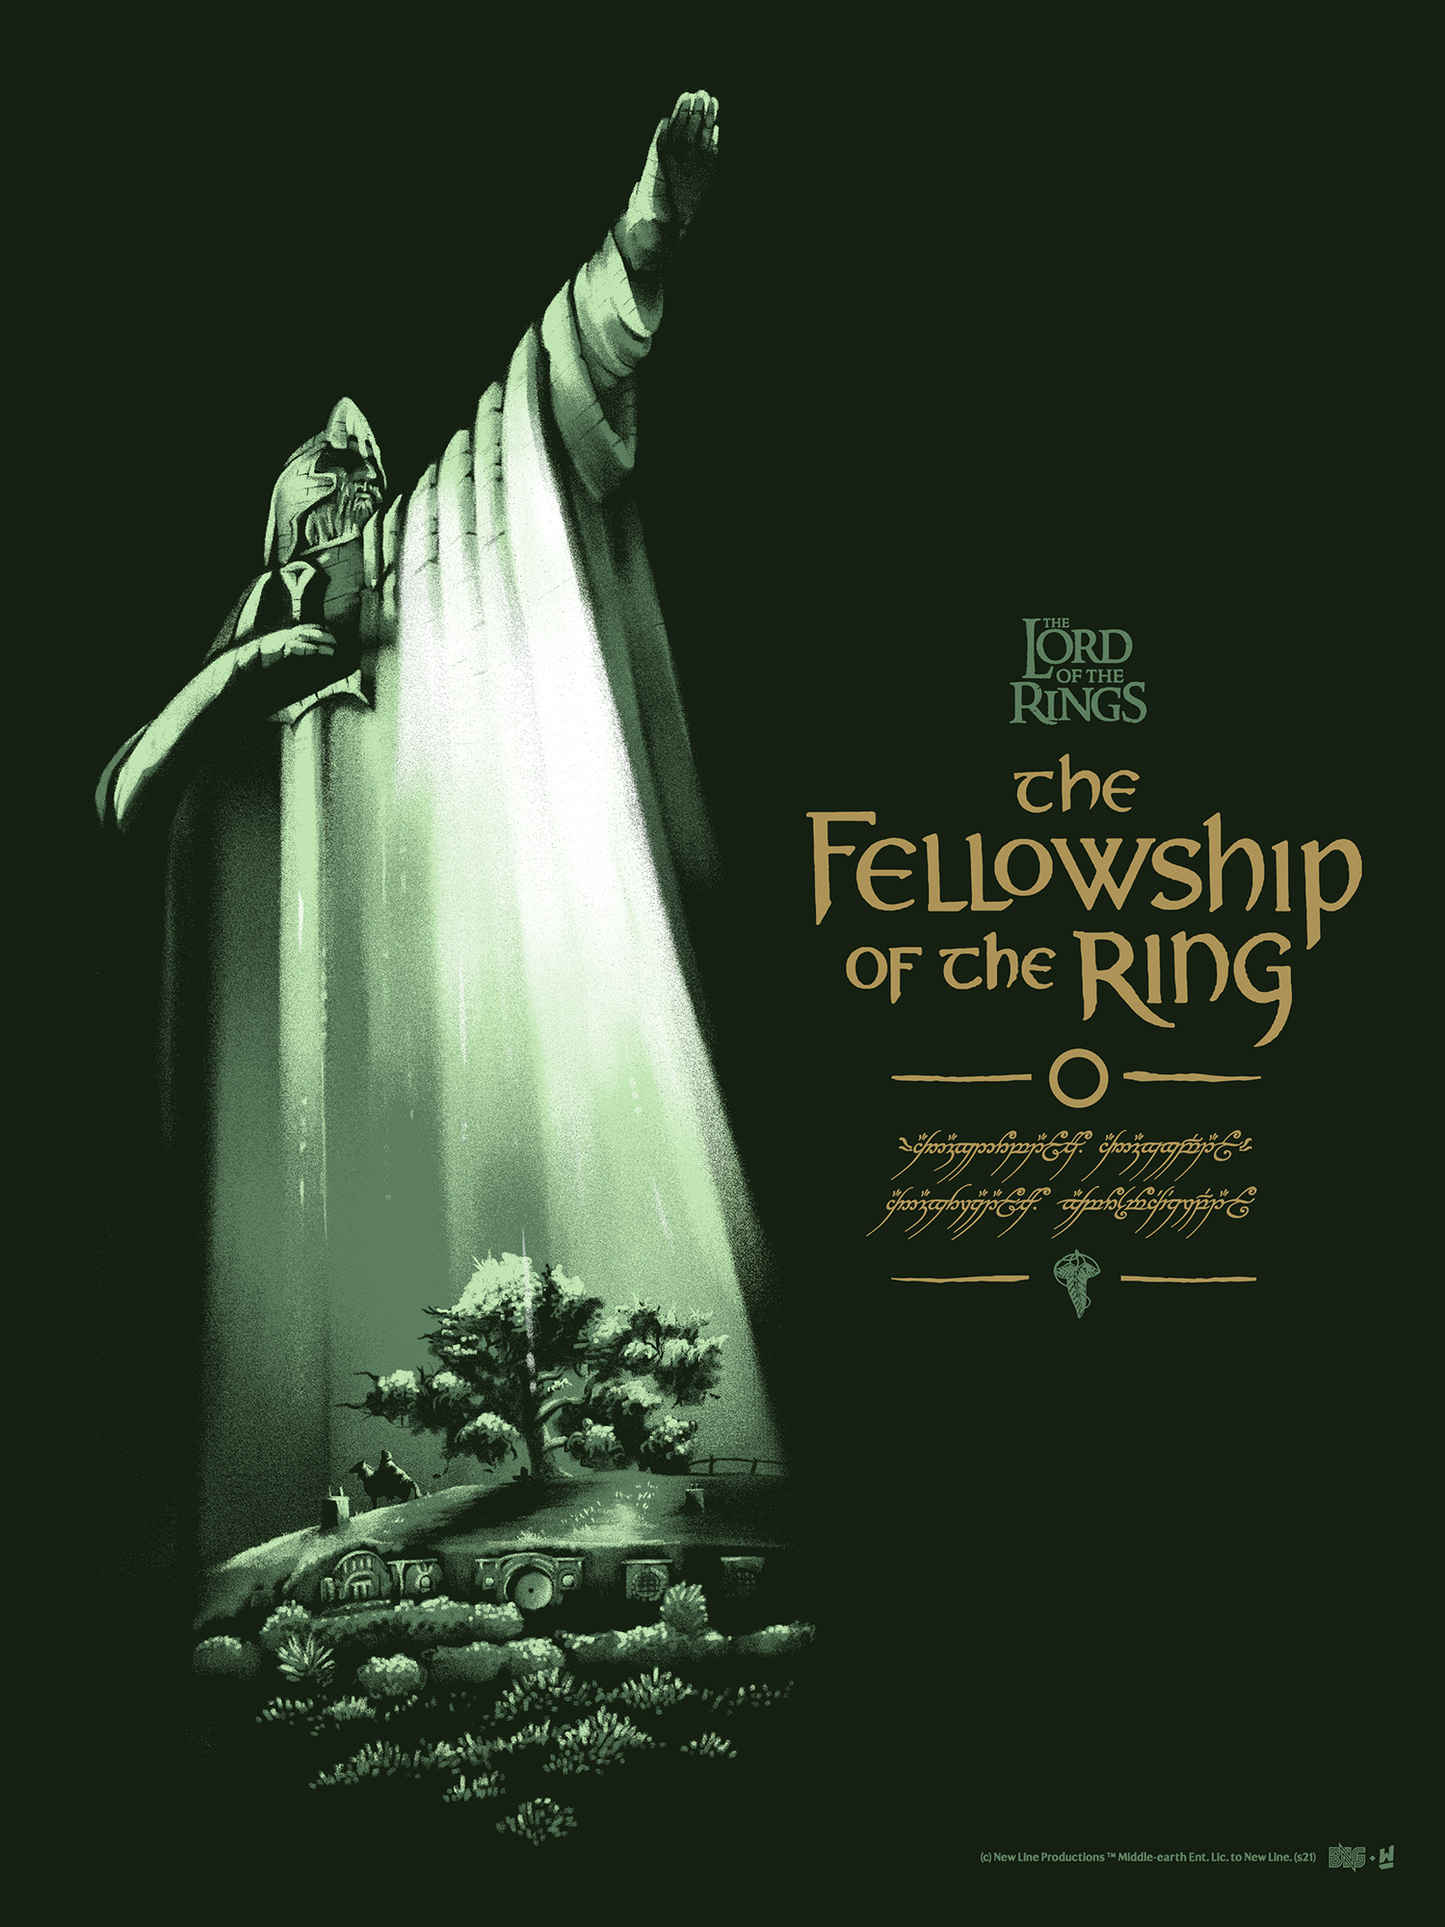 Lyndon Willoughby "The Lord of the Rings: The Fellowship of the Ring"